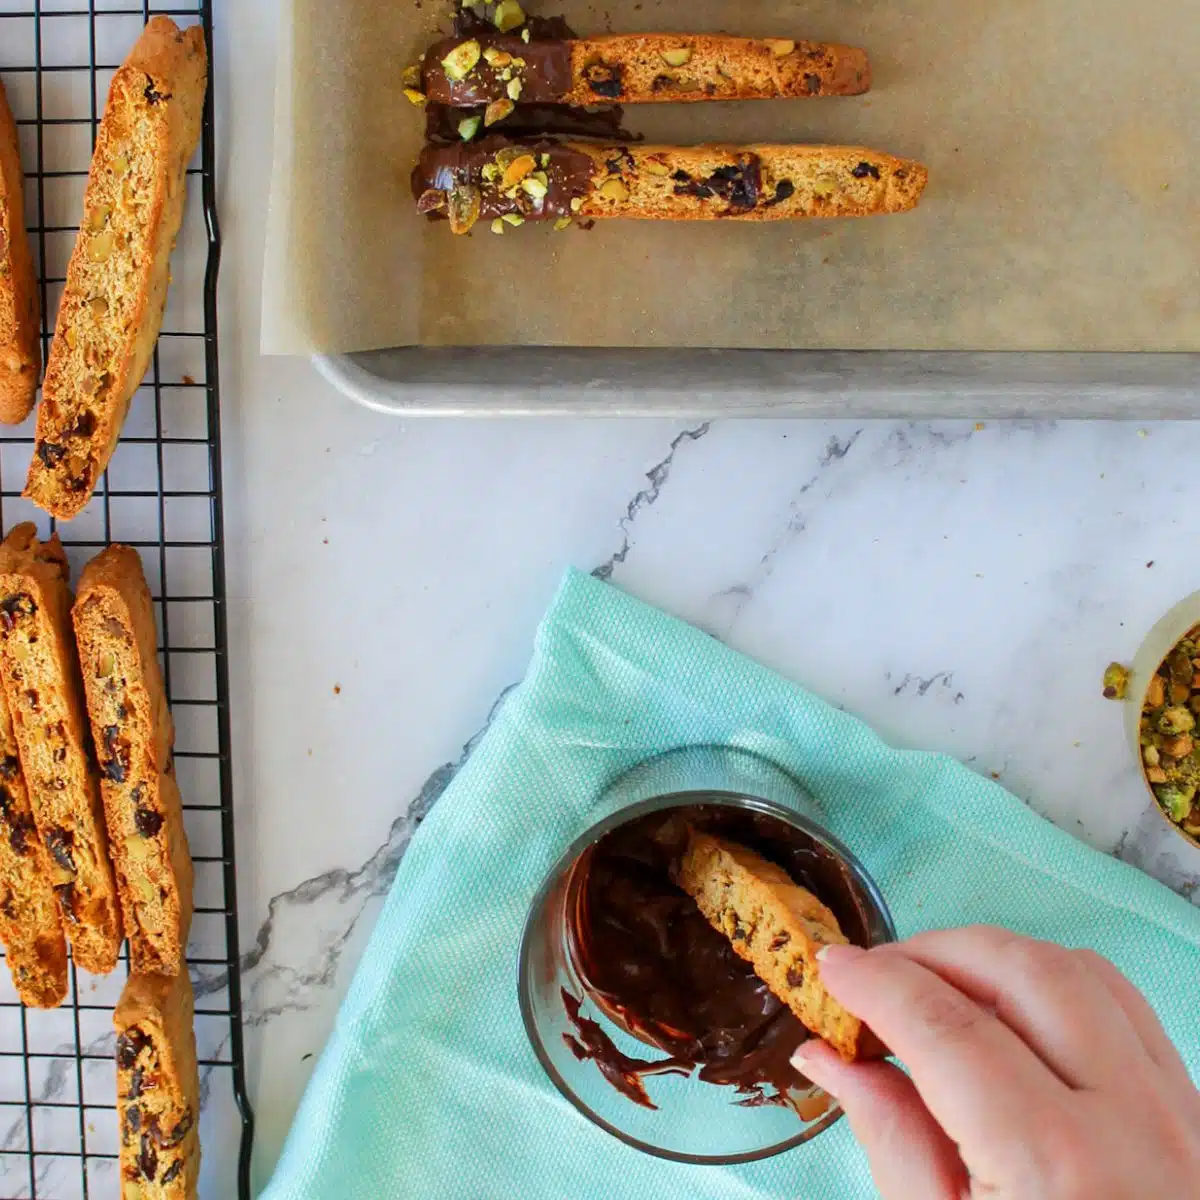 dipping biscotti in chocolate.